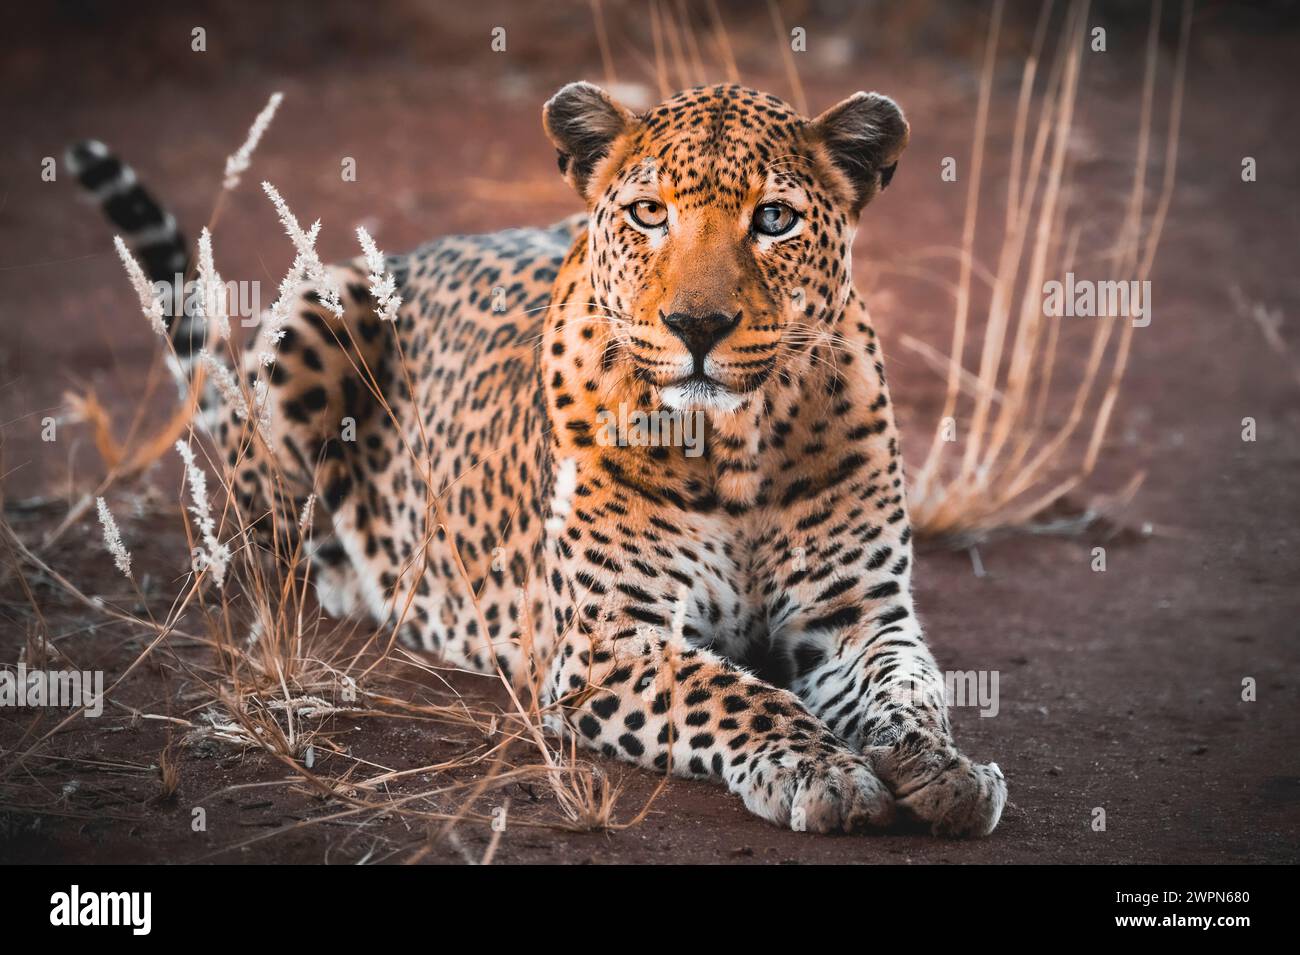 Close-up of a leopard looking into the camera, lying on red sand between yellow blades of grass in Namibia, Africa Stock Photo